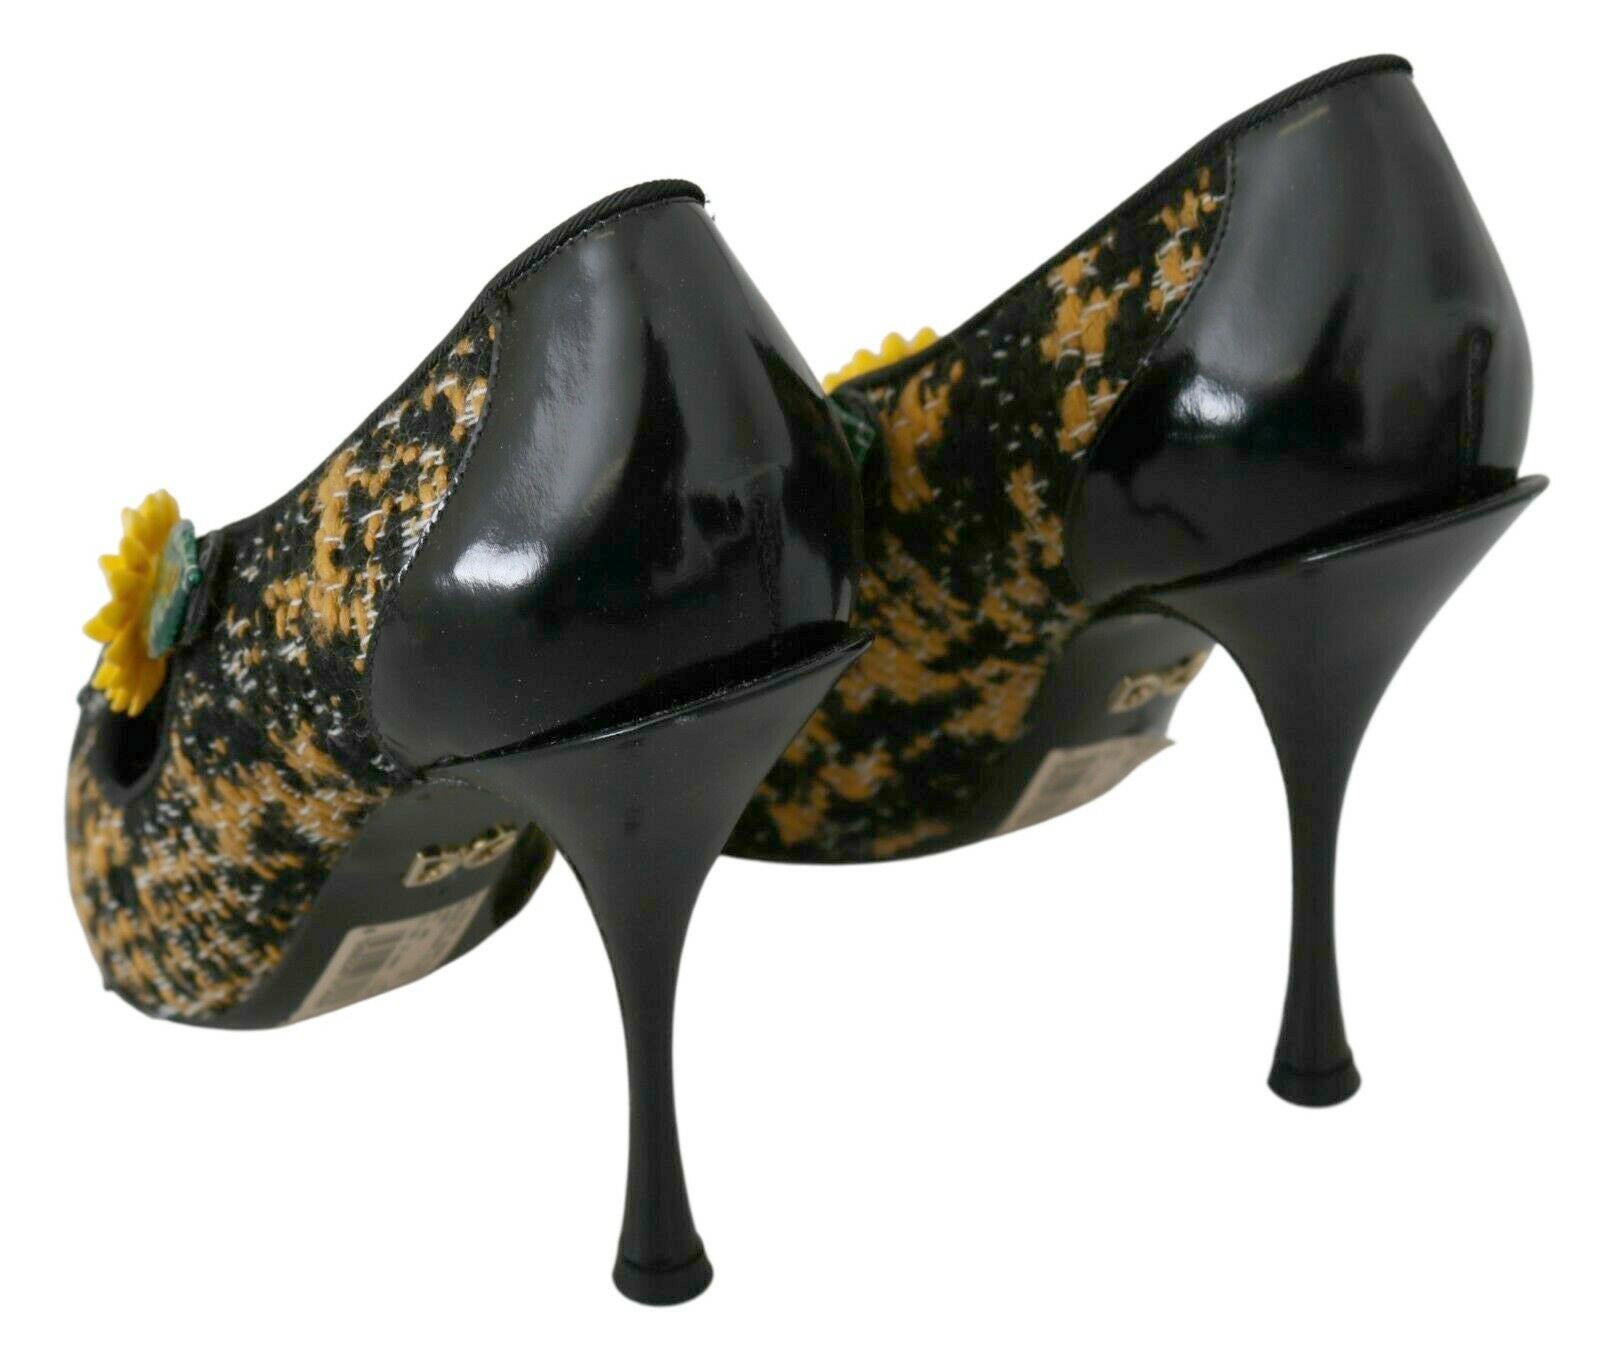 Dolce & Gabbana Black Yellow Mary Jane Leather Pumps Heels Shoes Floral Boucle 3